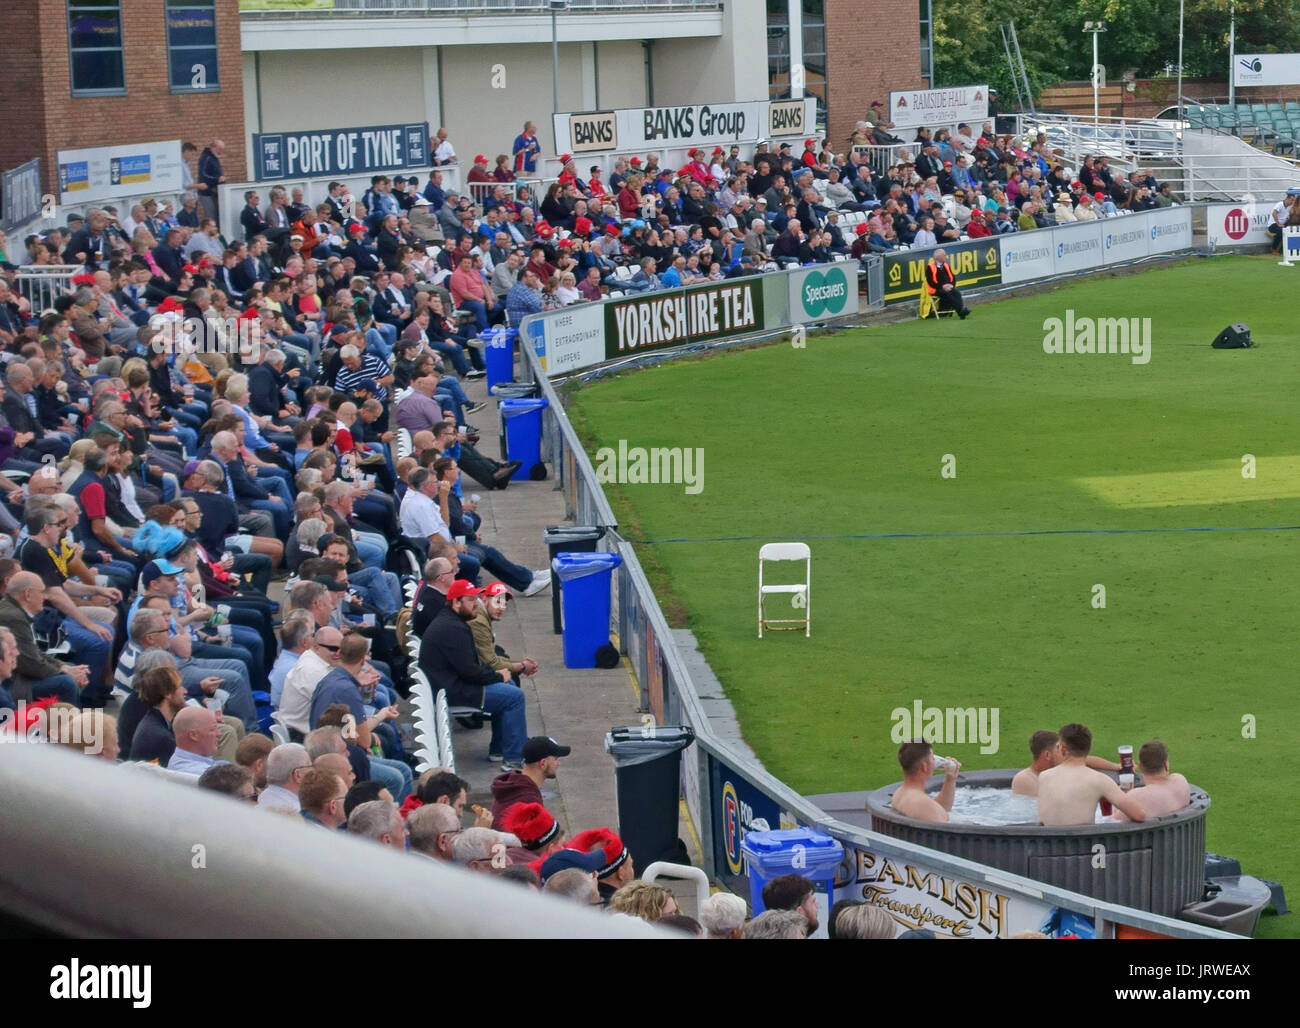 Spectators drinking beer in hot tub at cricket match, Chester-le-Street, England Stock Photo